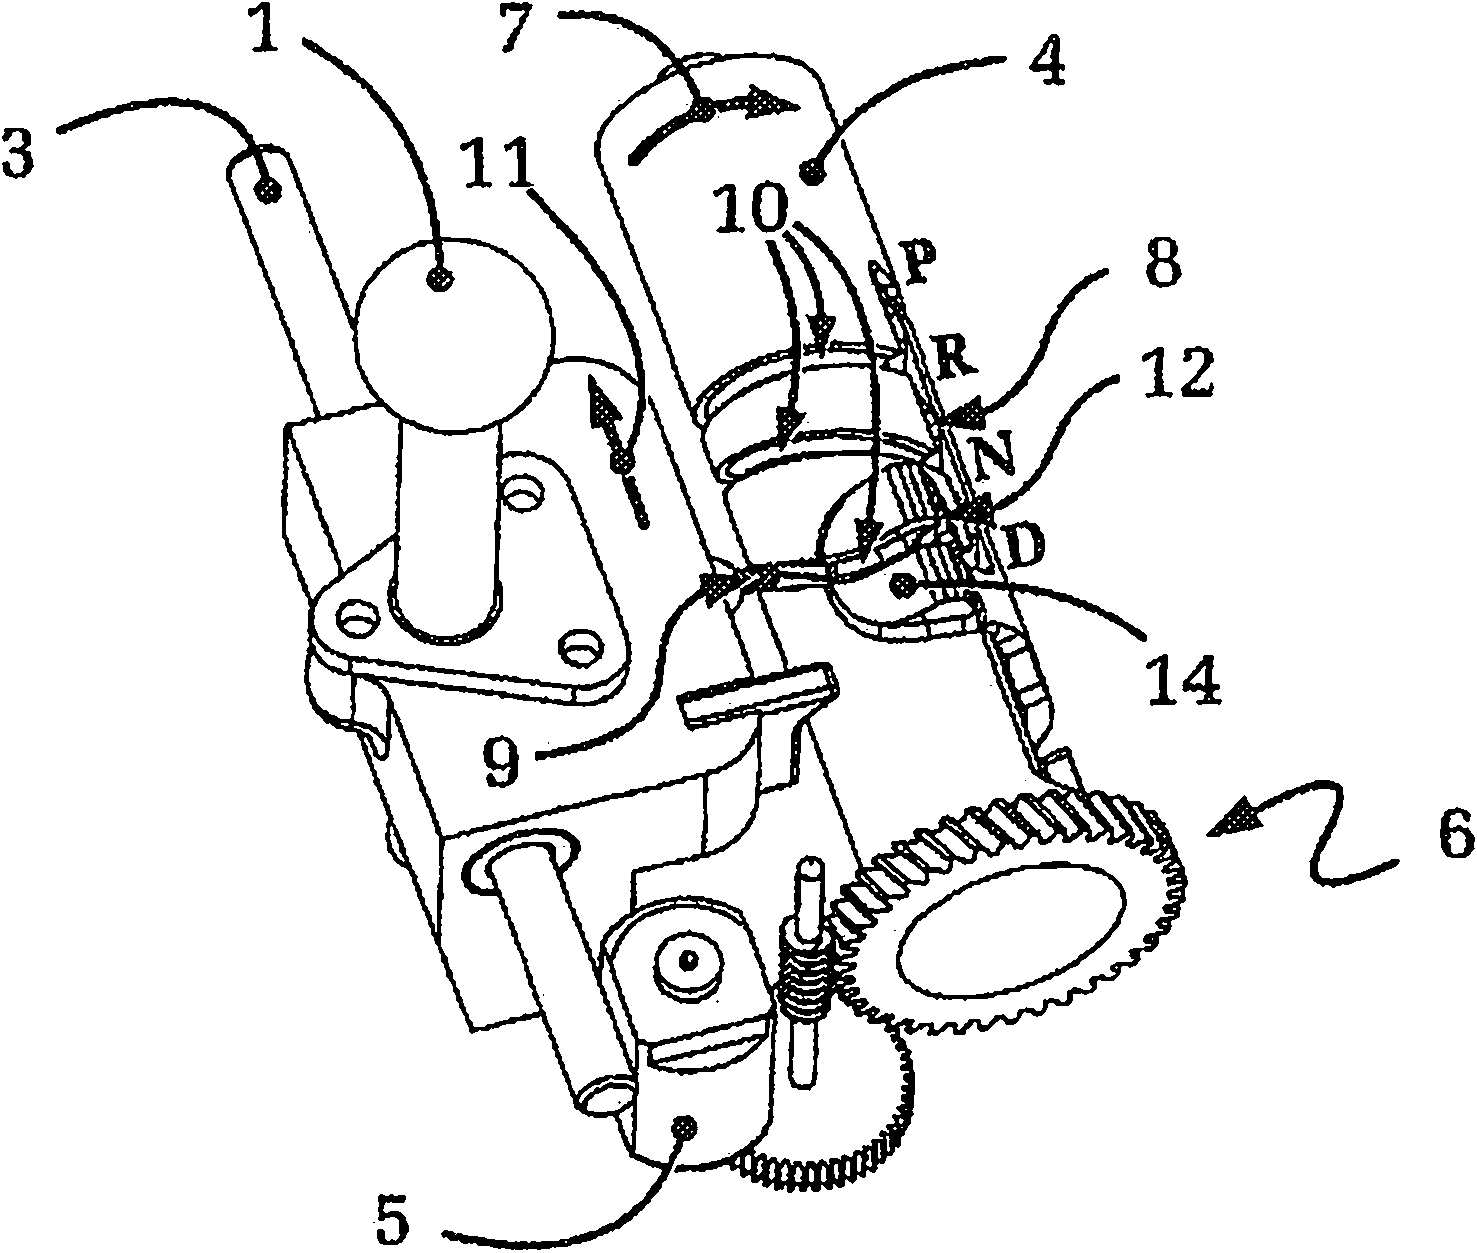 Operating device with gate shafts